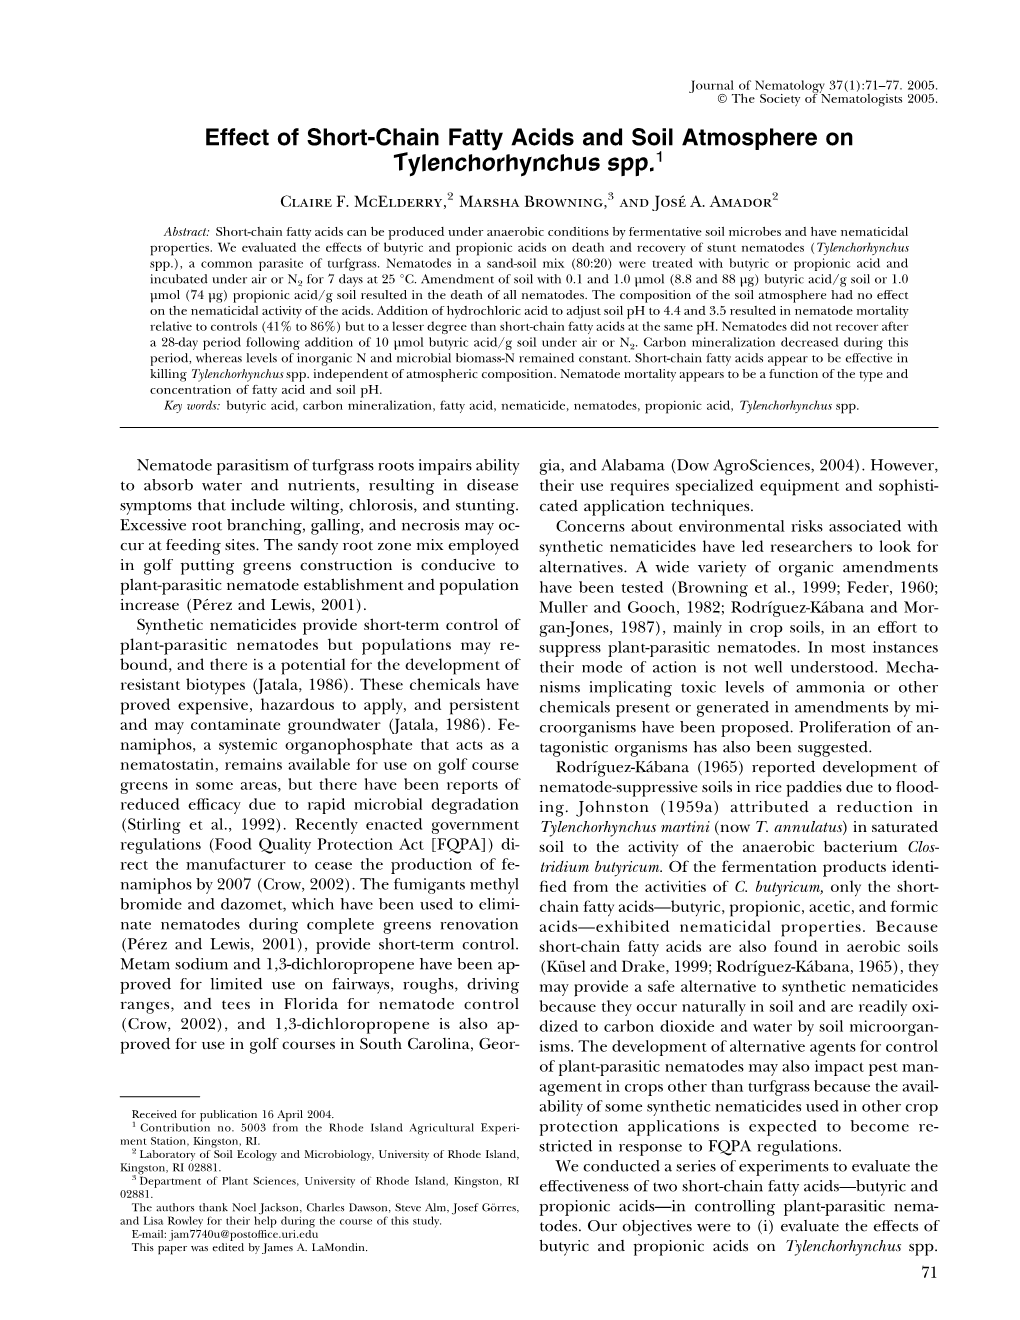 Effect of Short-Chain Fatty Acids and Soil Atmosphere on Tylenchorhynchus Spp.1